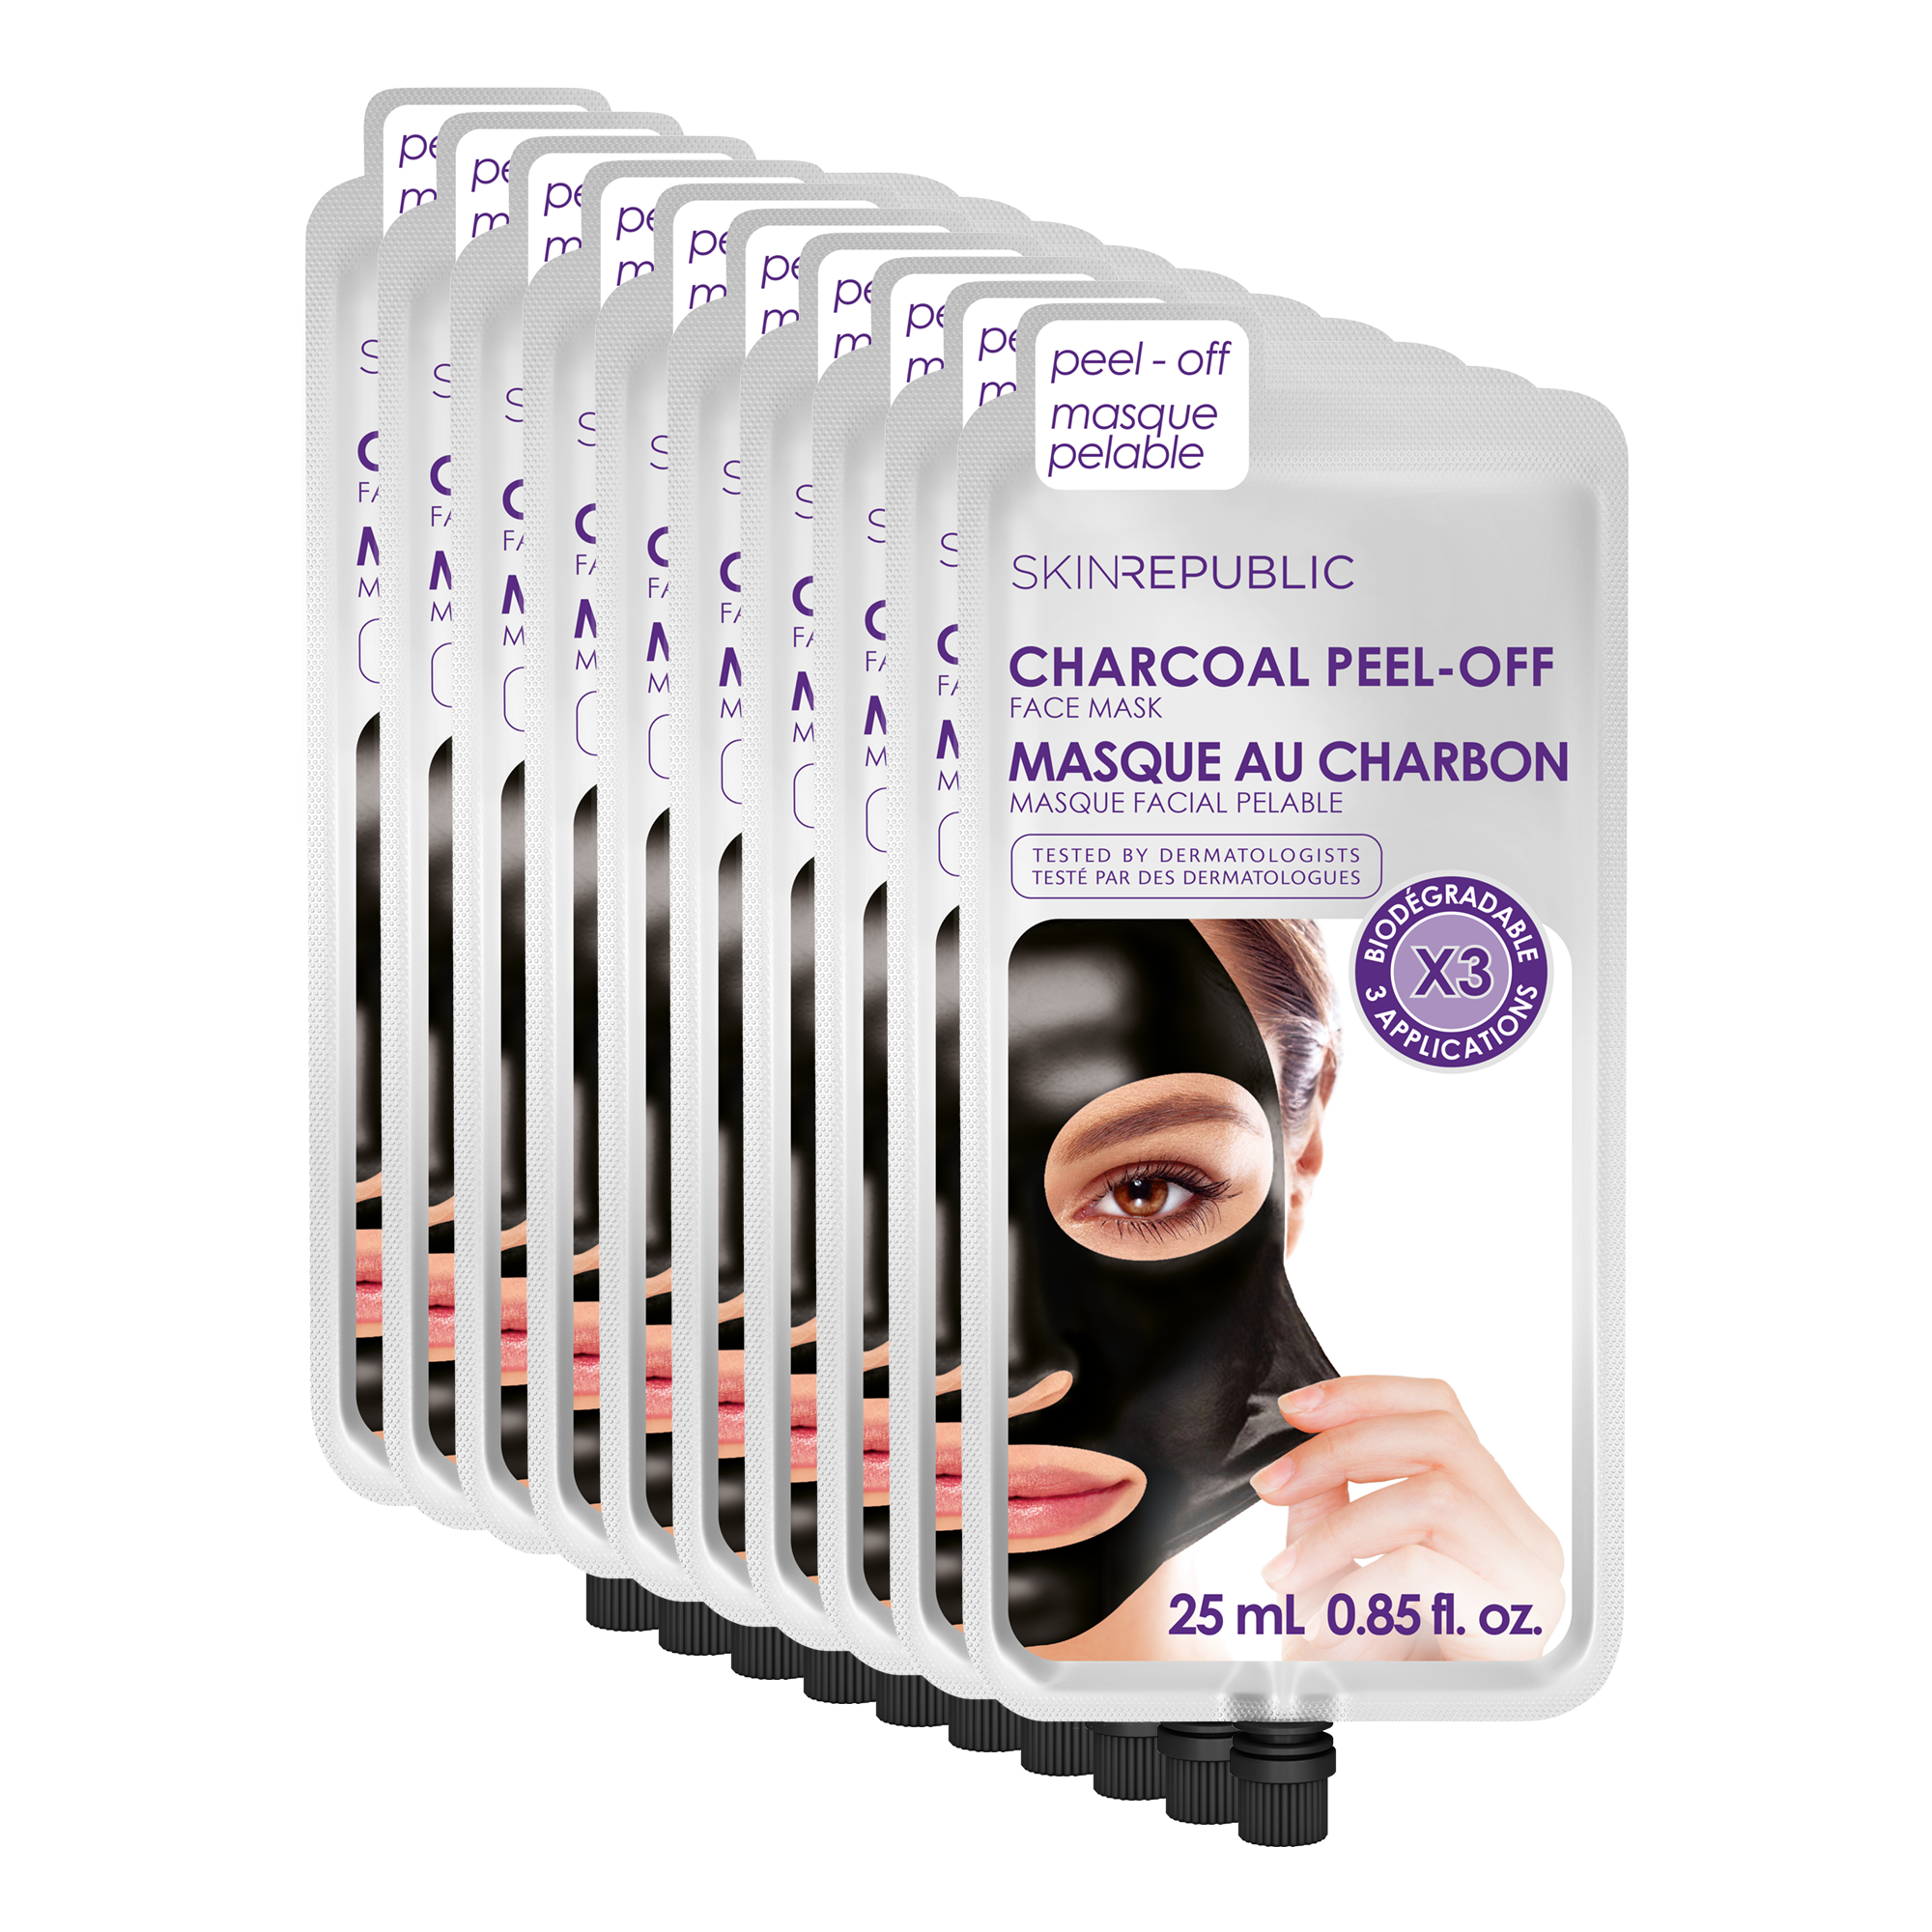 Charcoal Peel-Off Face Mask - 3 Applications, 10 Pack